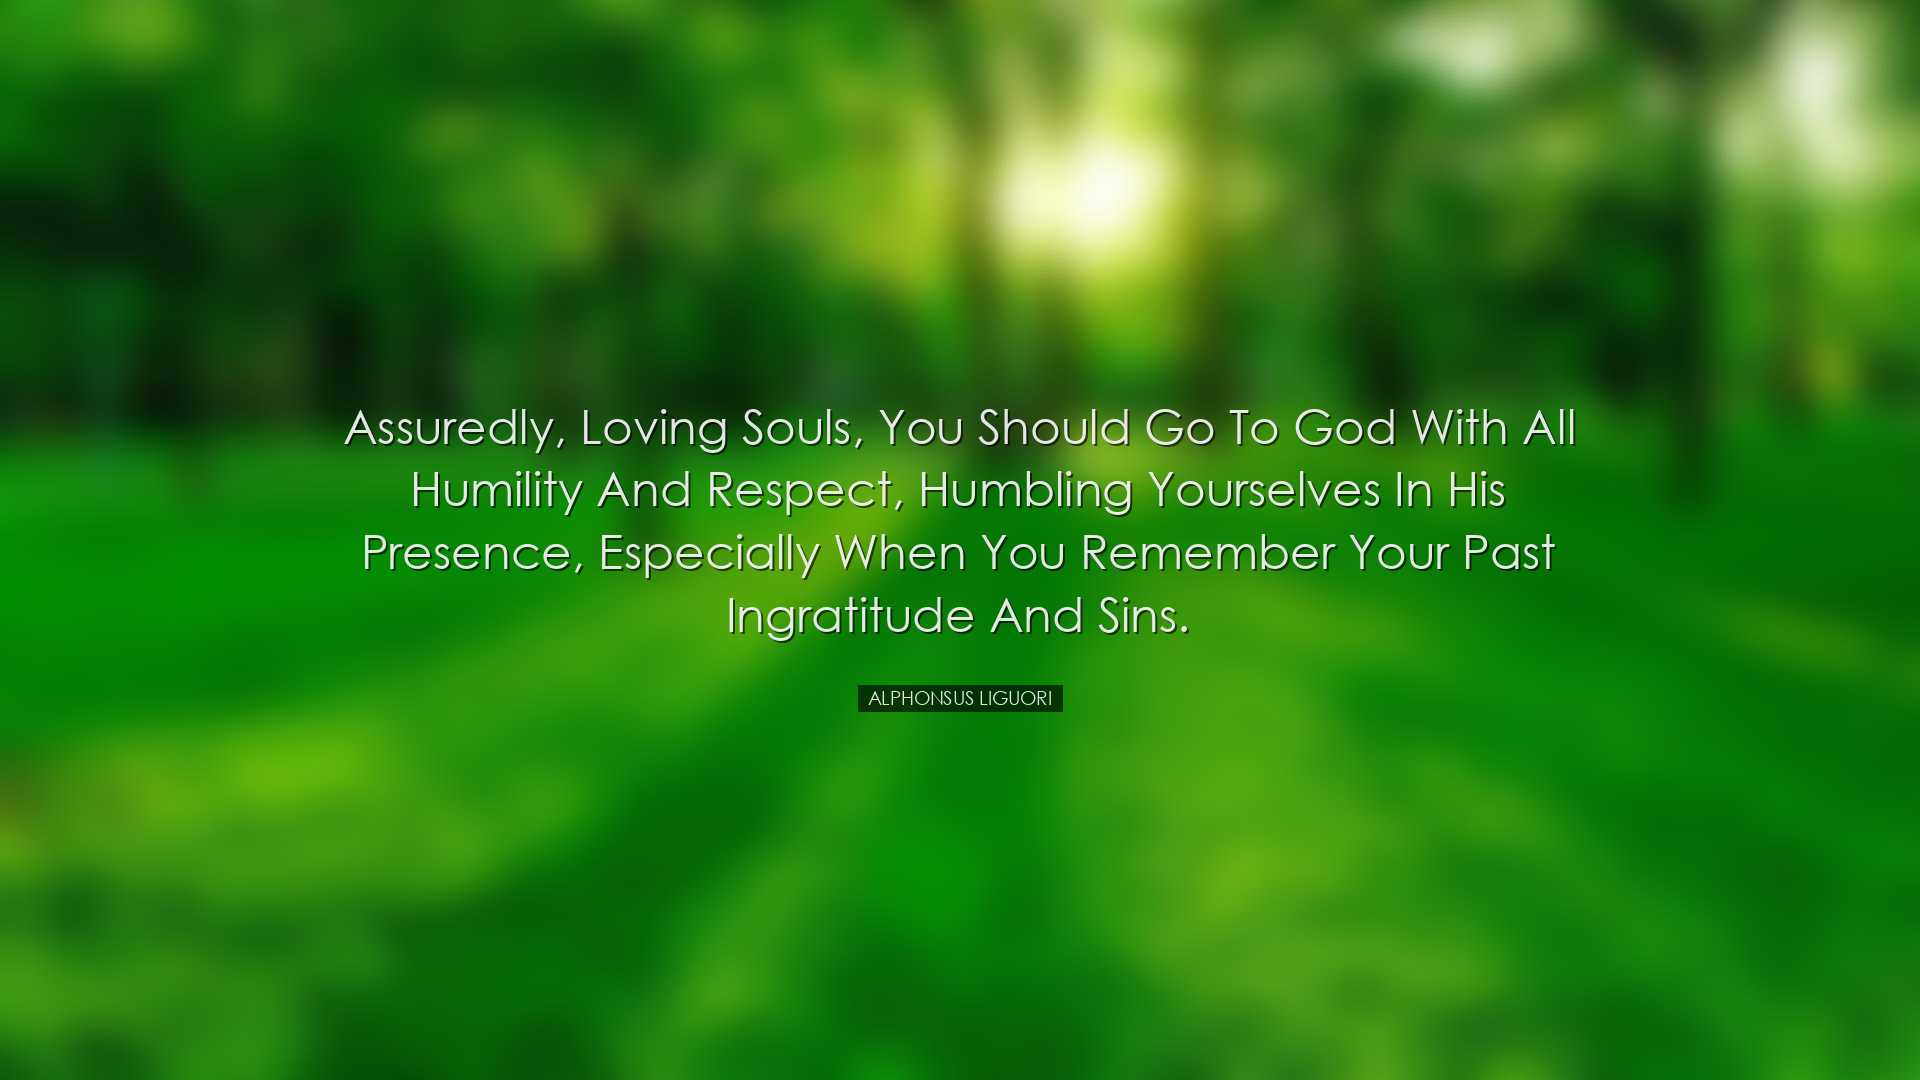 Assuredly, Loving Souls, you should go to God with all humility an